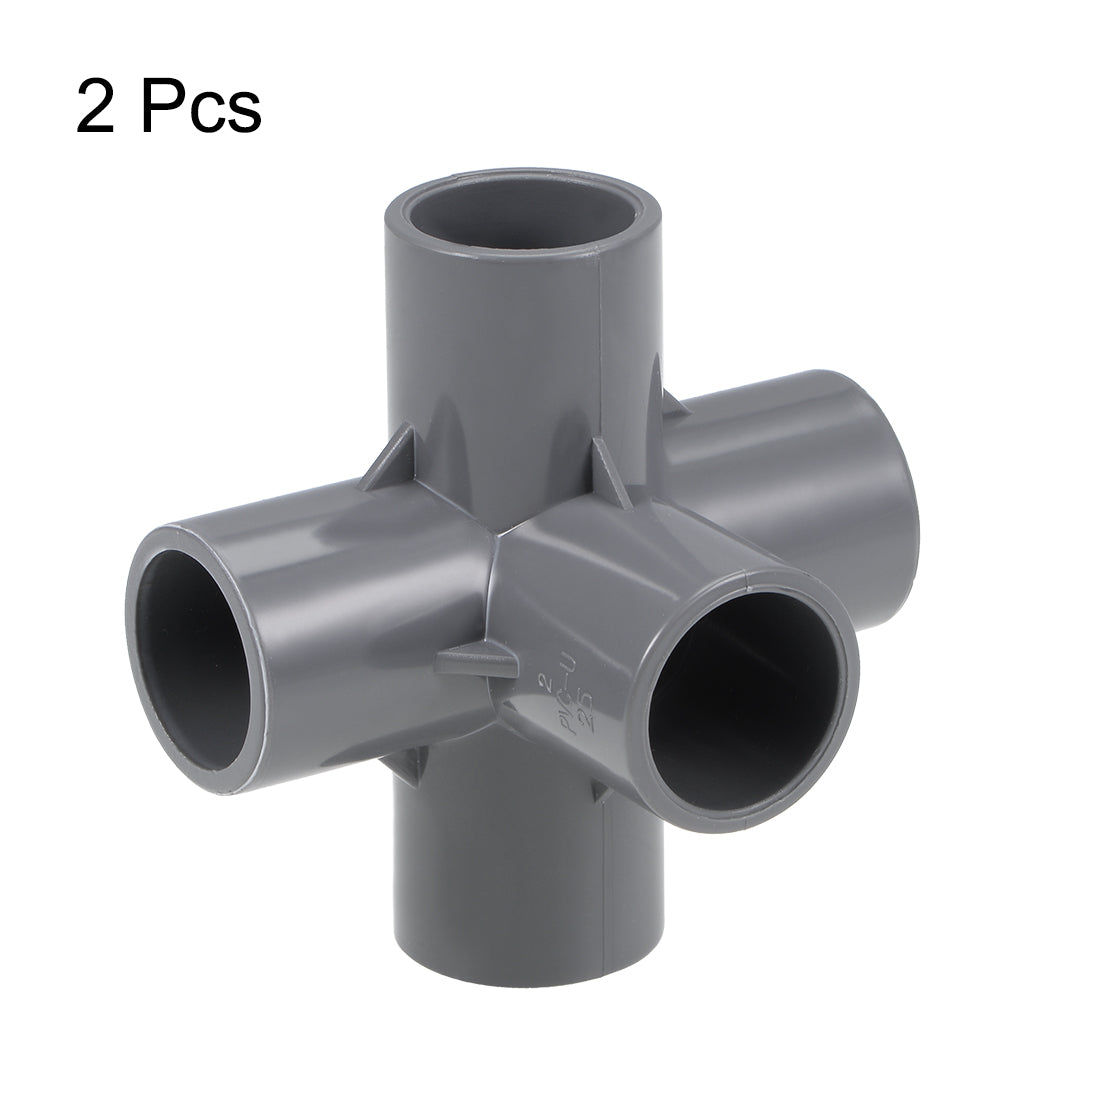 uxcell Uxcell 5 Way 25mm Tee Metric PVC Fitting Elbow - PVC Furniture Elbow Fittings Gray 2Pcs